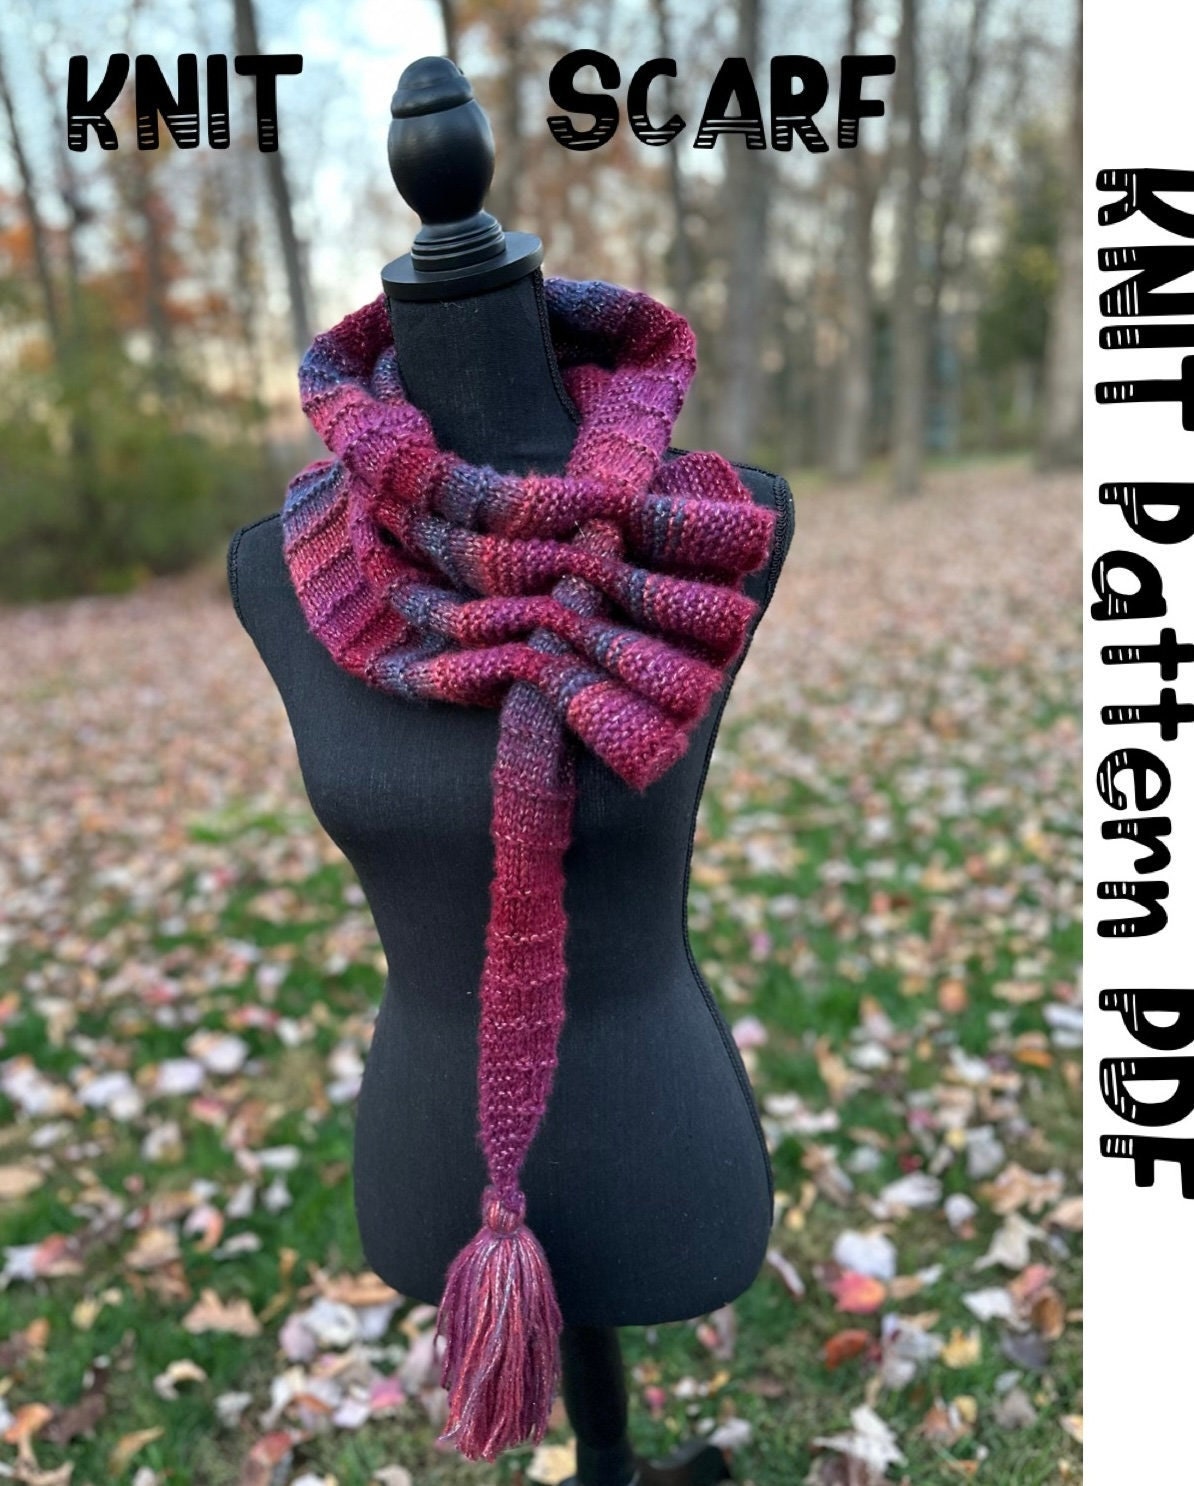 Hurdle Stitch Scarf - Loom Knitted Pattern and video tutorial